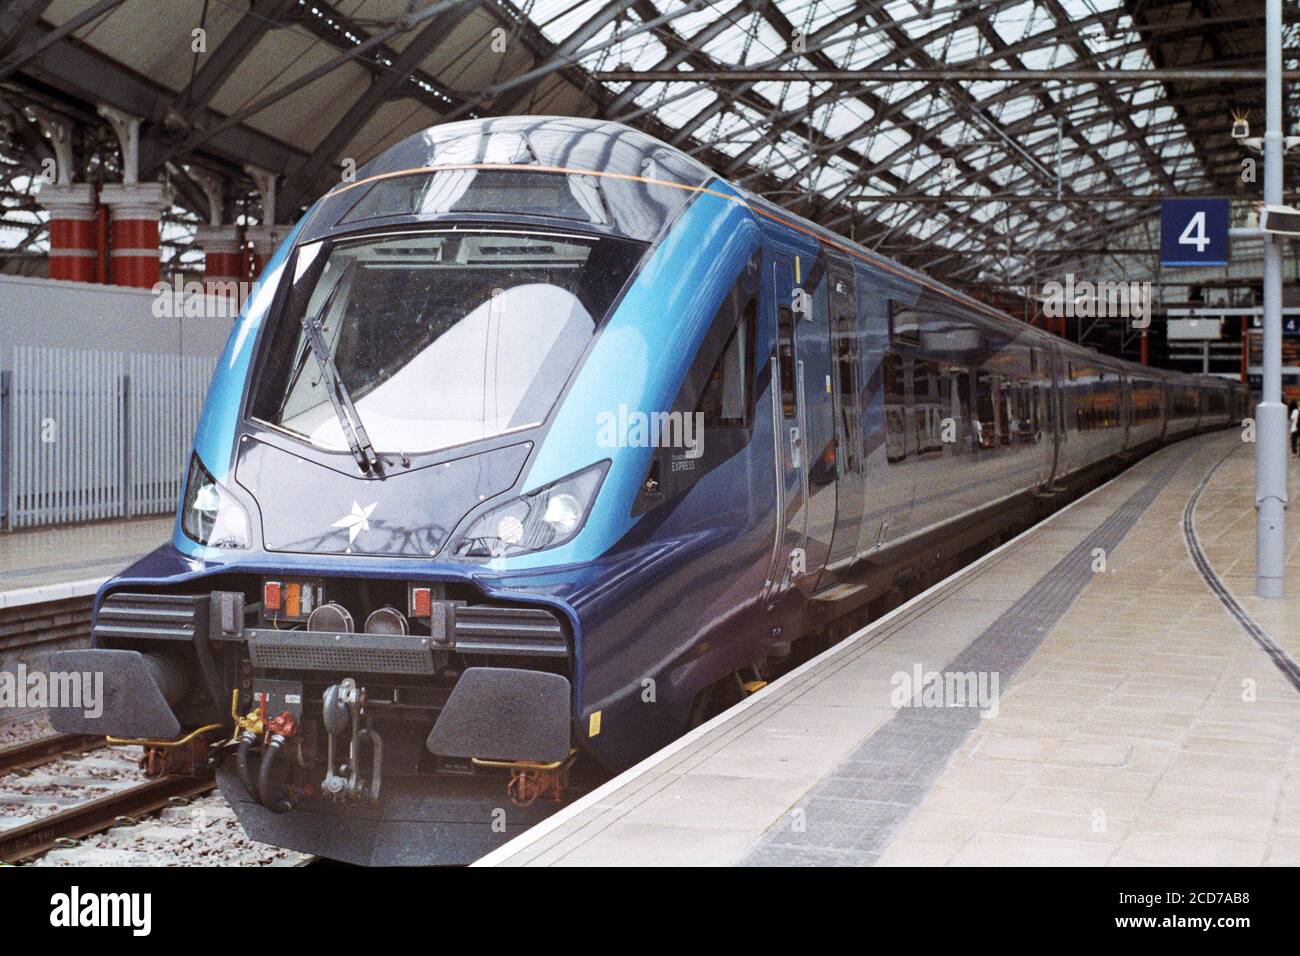 Liverpool, UK - 8 August 2020: A TPE (TransPennine Express) train at Liverpool Lime Street Platform 4 for express service. Stock Photo